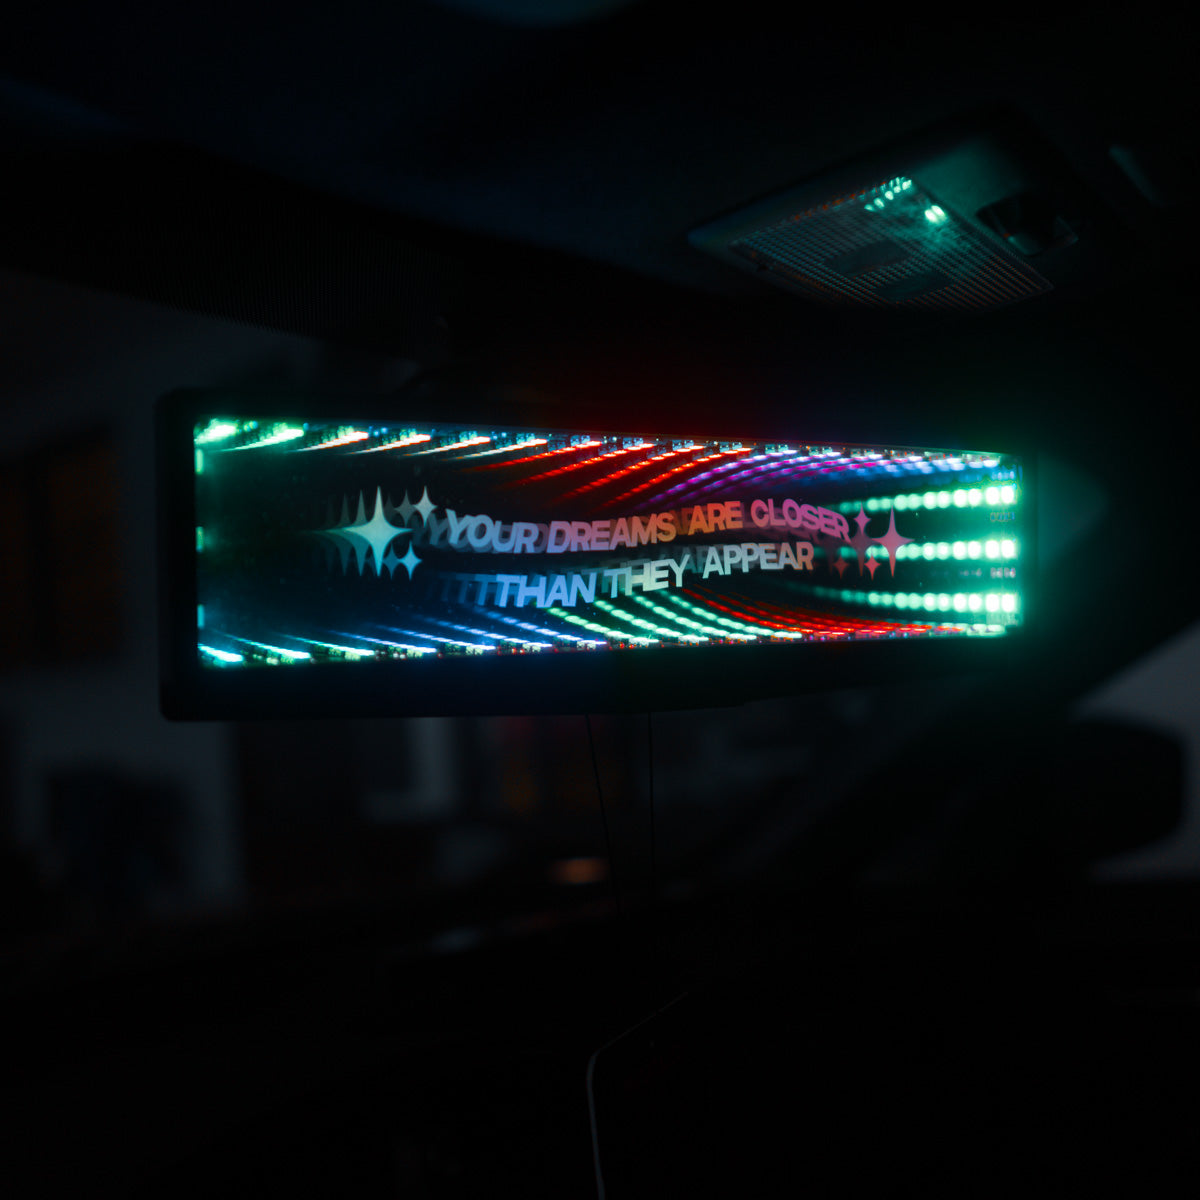 "YOUR DREAMS ARE CLOSER THAN THEY APPEAR" RGB Endless Infinity Mirror